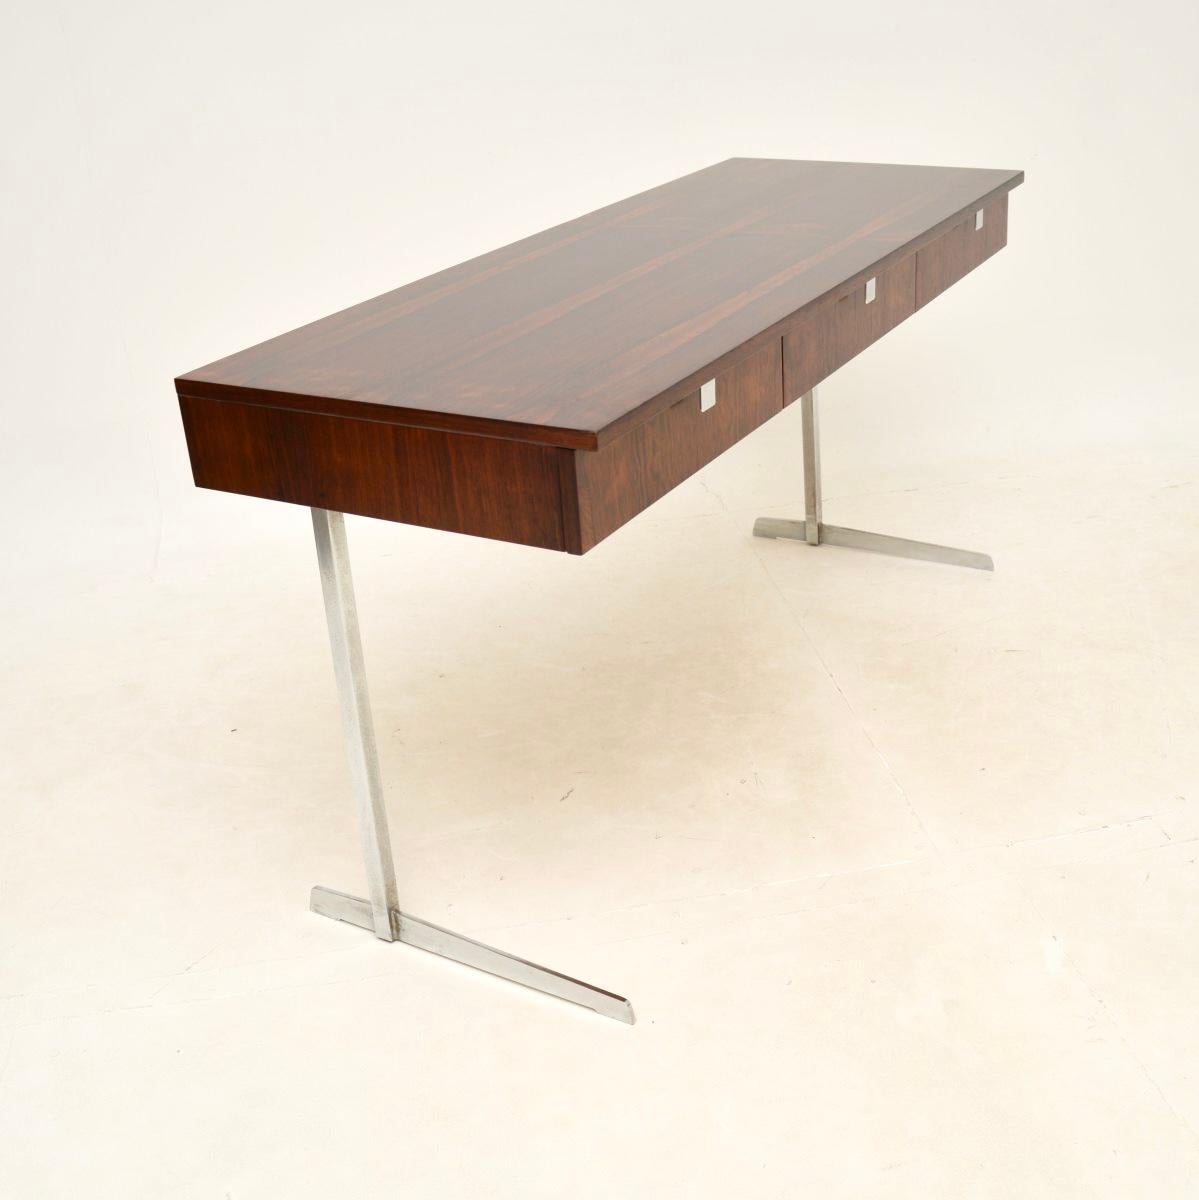 A very stylish and extremely well made vintage desk, made in Belgium and dating from the 1960-70’s.

The quality is outstanding, this has a gorgeous design, standing on chromed steel cantilever legs. There are also lovely chrome handles on the